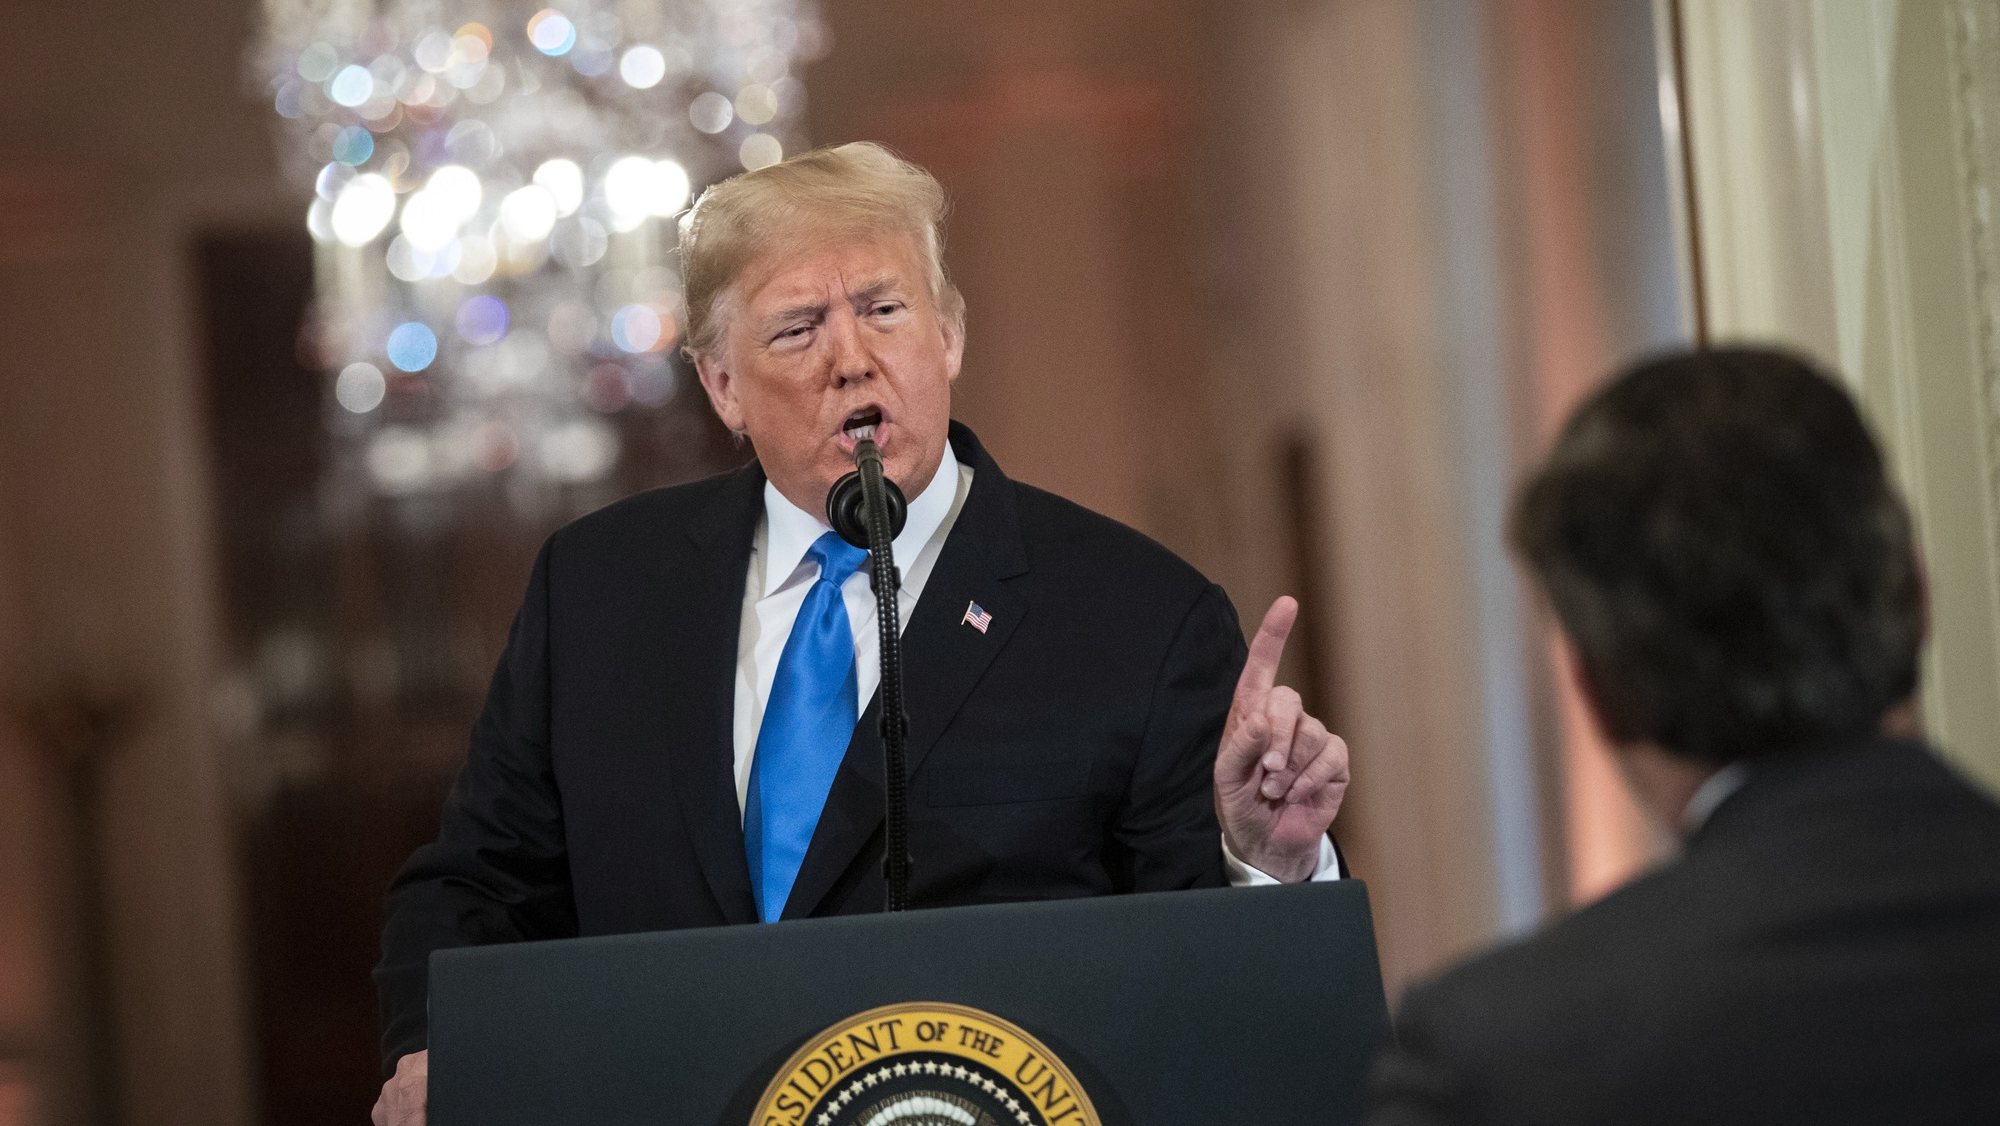 epa07170829 (FILE) - US President Donald J. Trump argues with CNN report Jim Acosta during a news conference in the East Room, at the White House in Washington, DC, USA, on 07 November 2018, (reissued 16 November 2018). Reports on 16 November 2018 state that following a hearing in Washington, DC, a judge ordered that Jim Acosta&#039;s  White House press pass must be reinstated immediately .  EPA/Al Drago / POOL